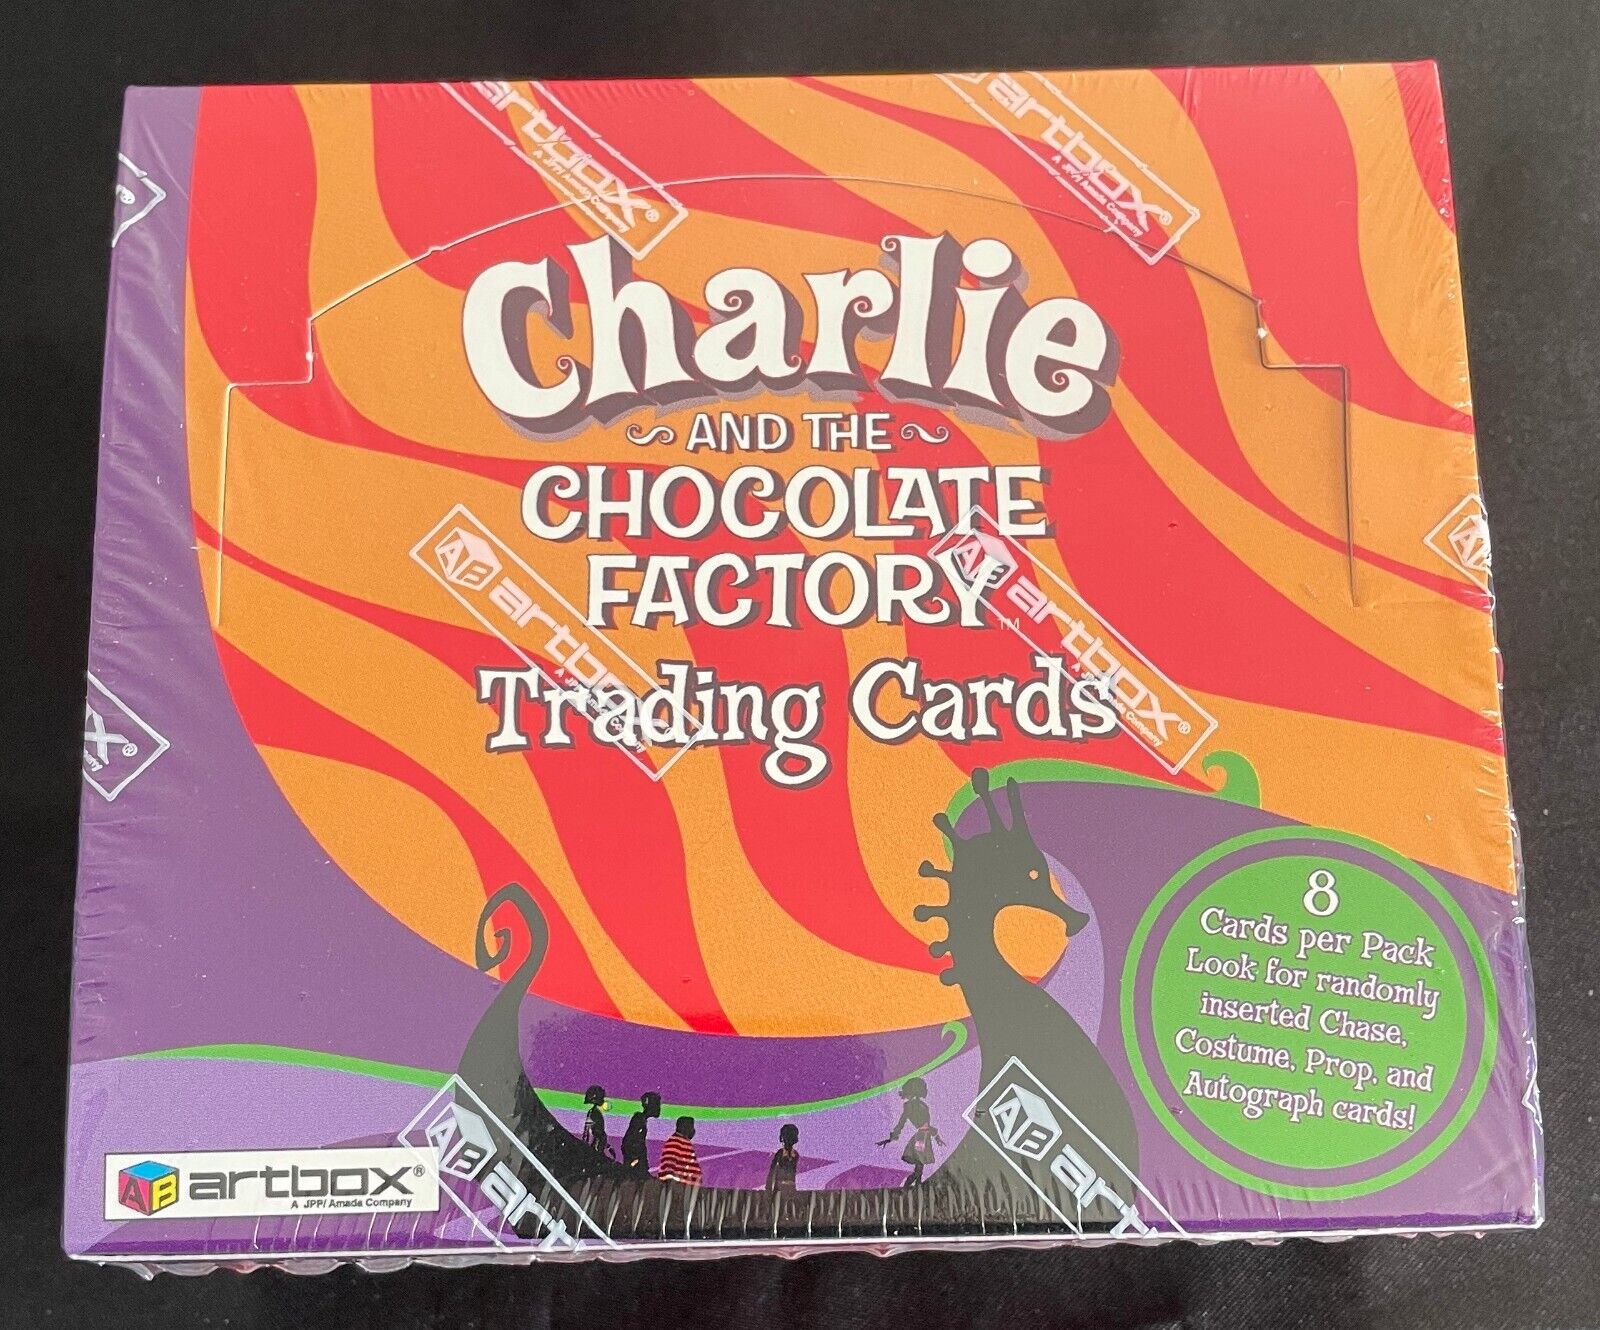 Charlie And The Chocolate Factory - Sealed Booster Box - Artbox 1355/6000